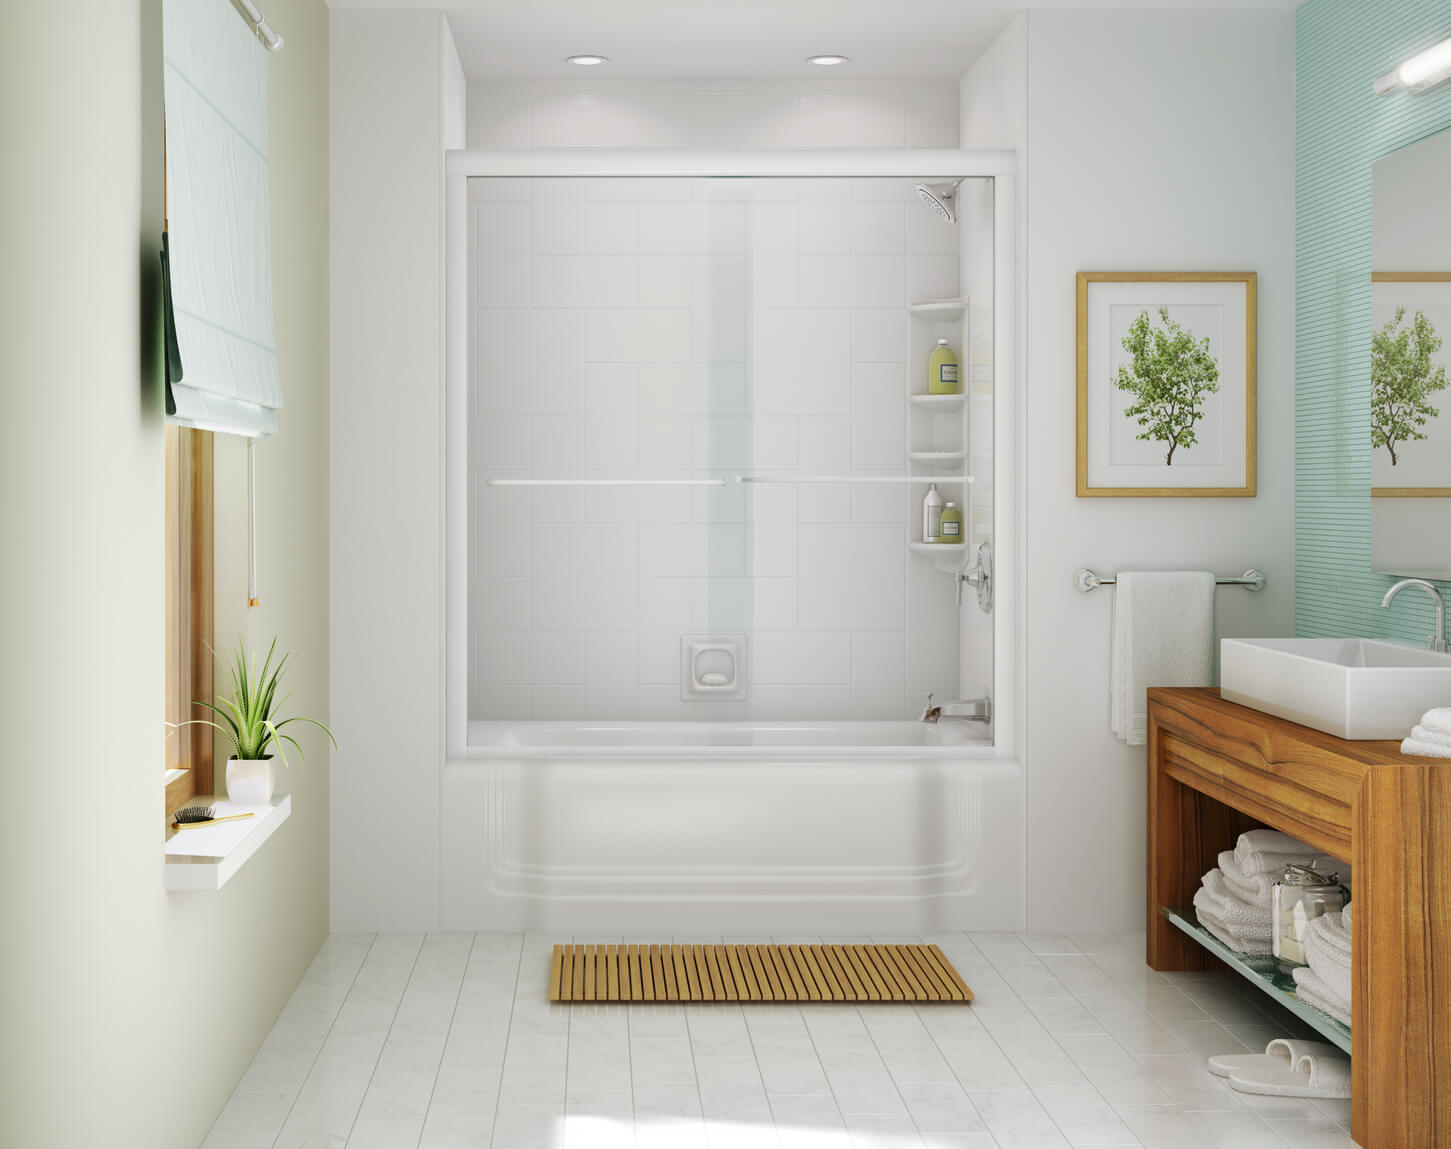 Bathroom Shower Remodel Ideas to Implement